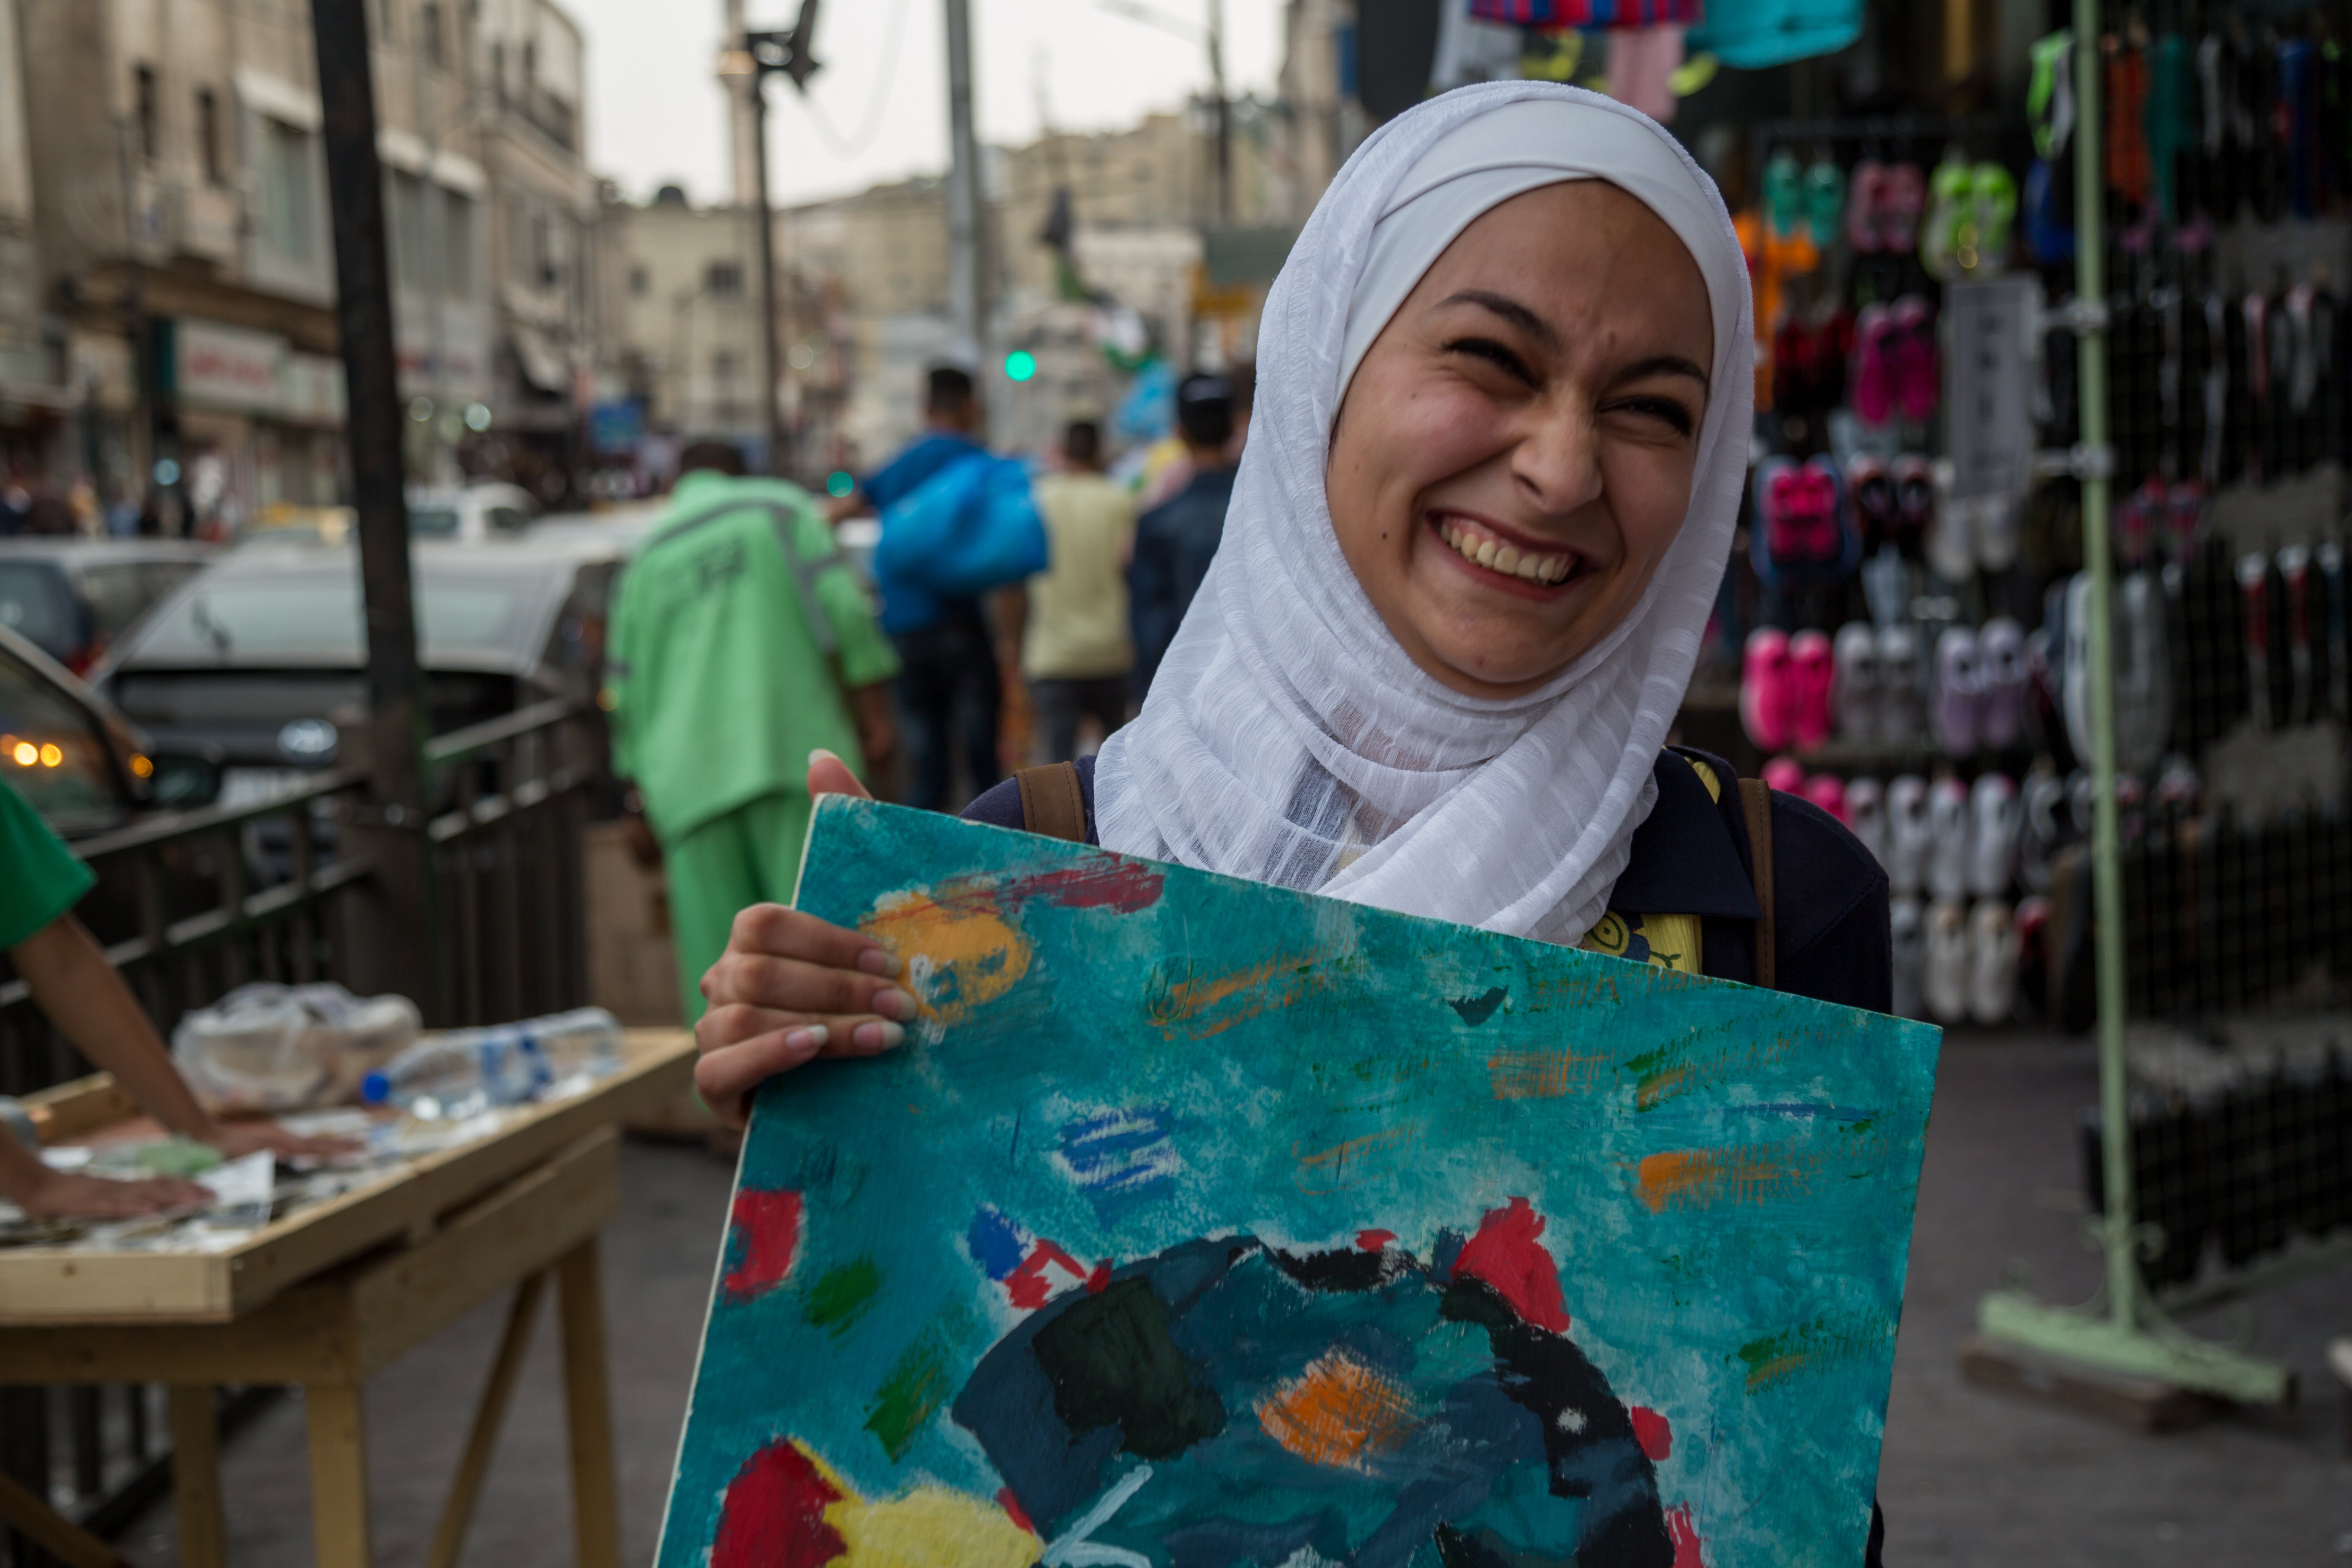 17-year-old Jordanian girl with one of her paintings